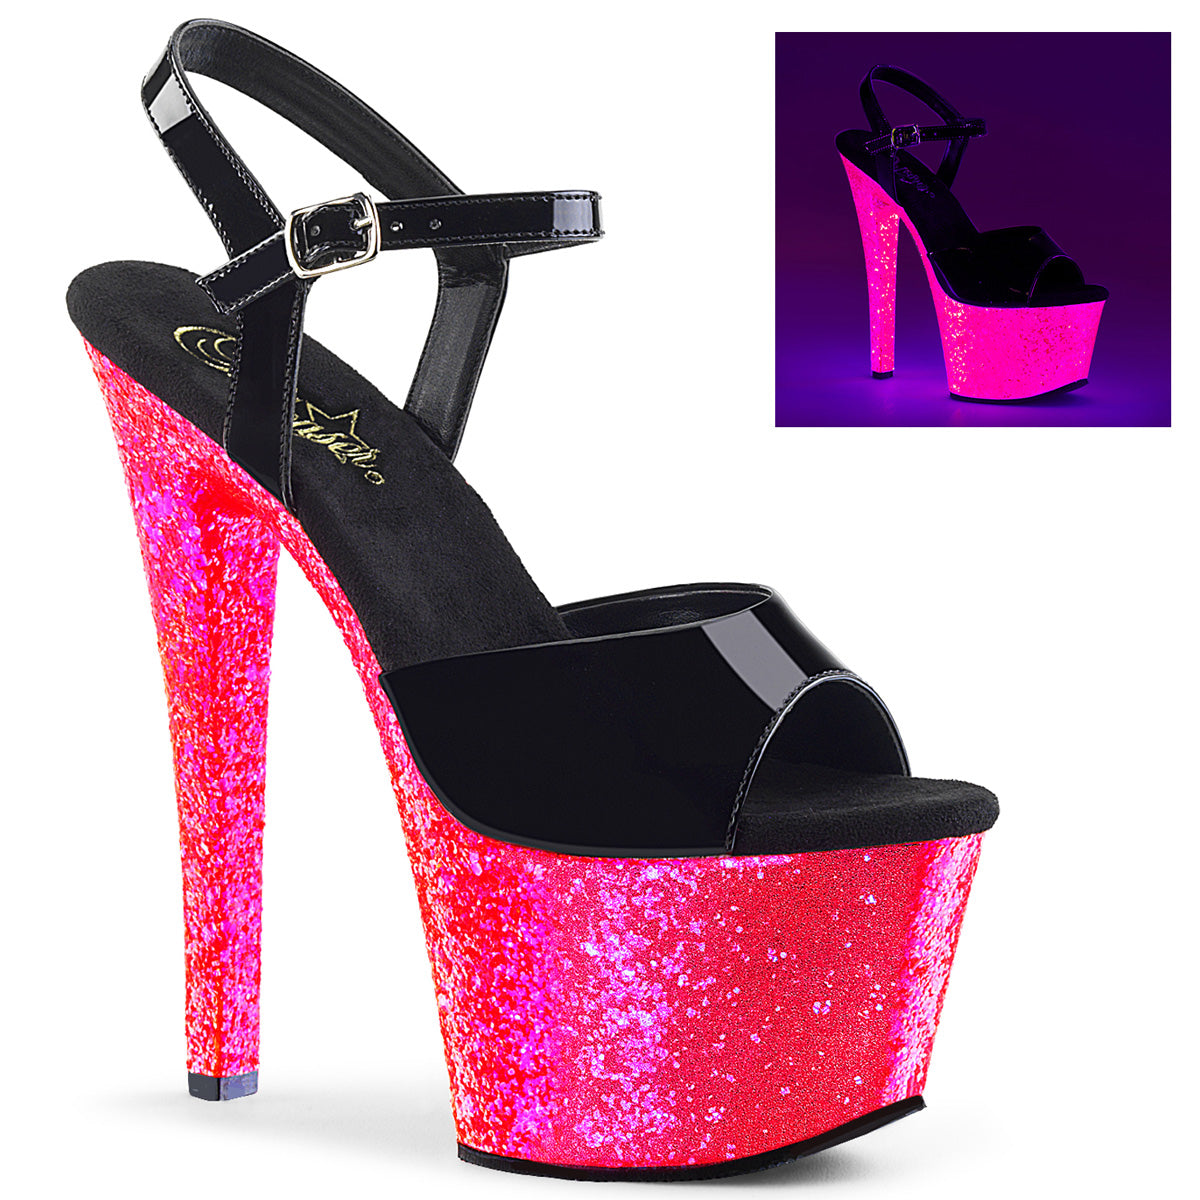 SKY-309UVLG 7" Heel Black with Pink Glitter Strippers Shoes